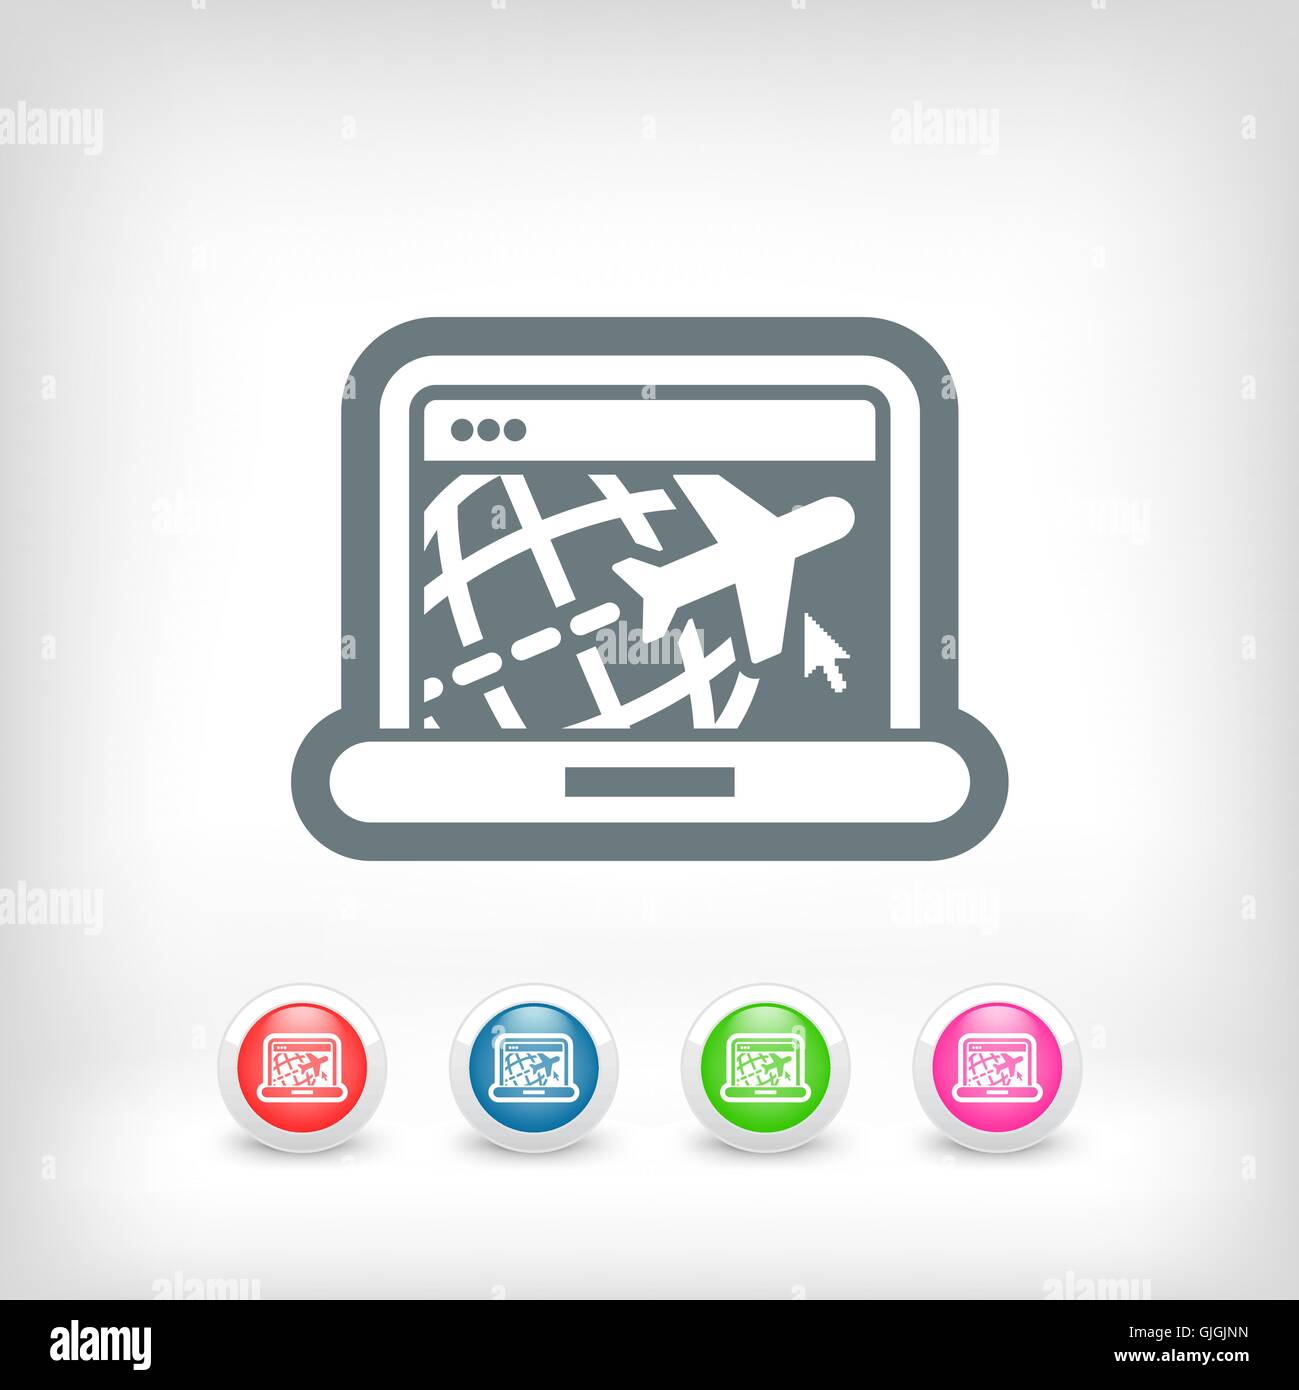 Illustration of travel web agency icon Stock Vector